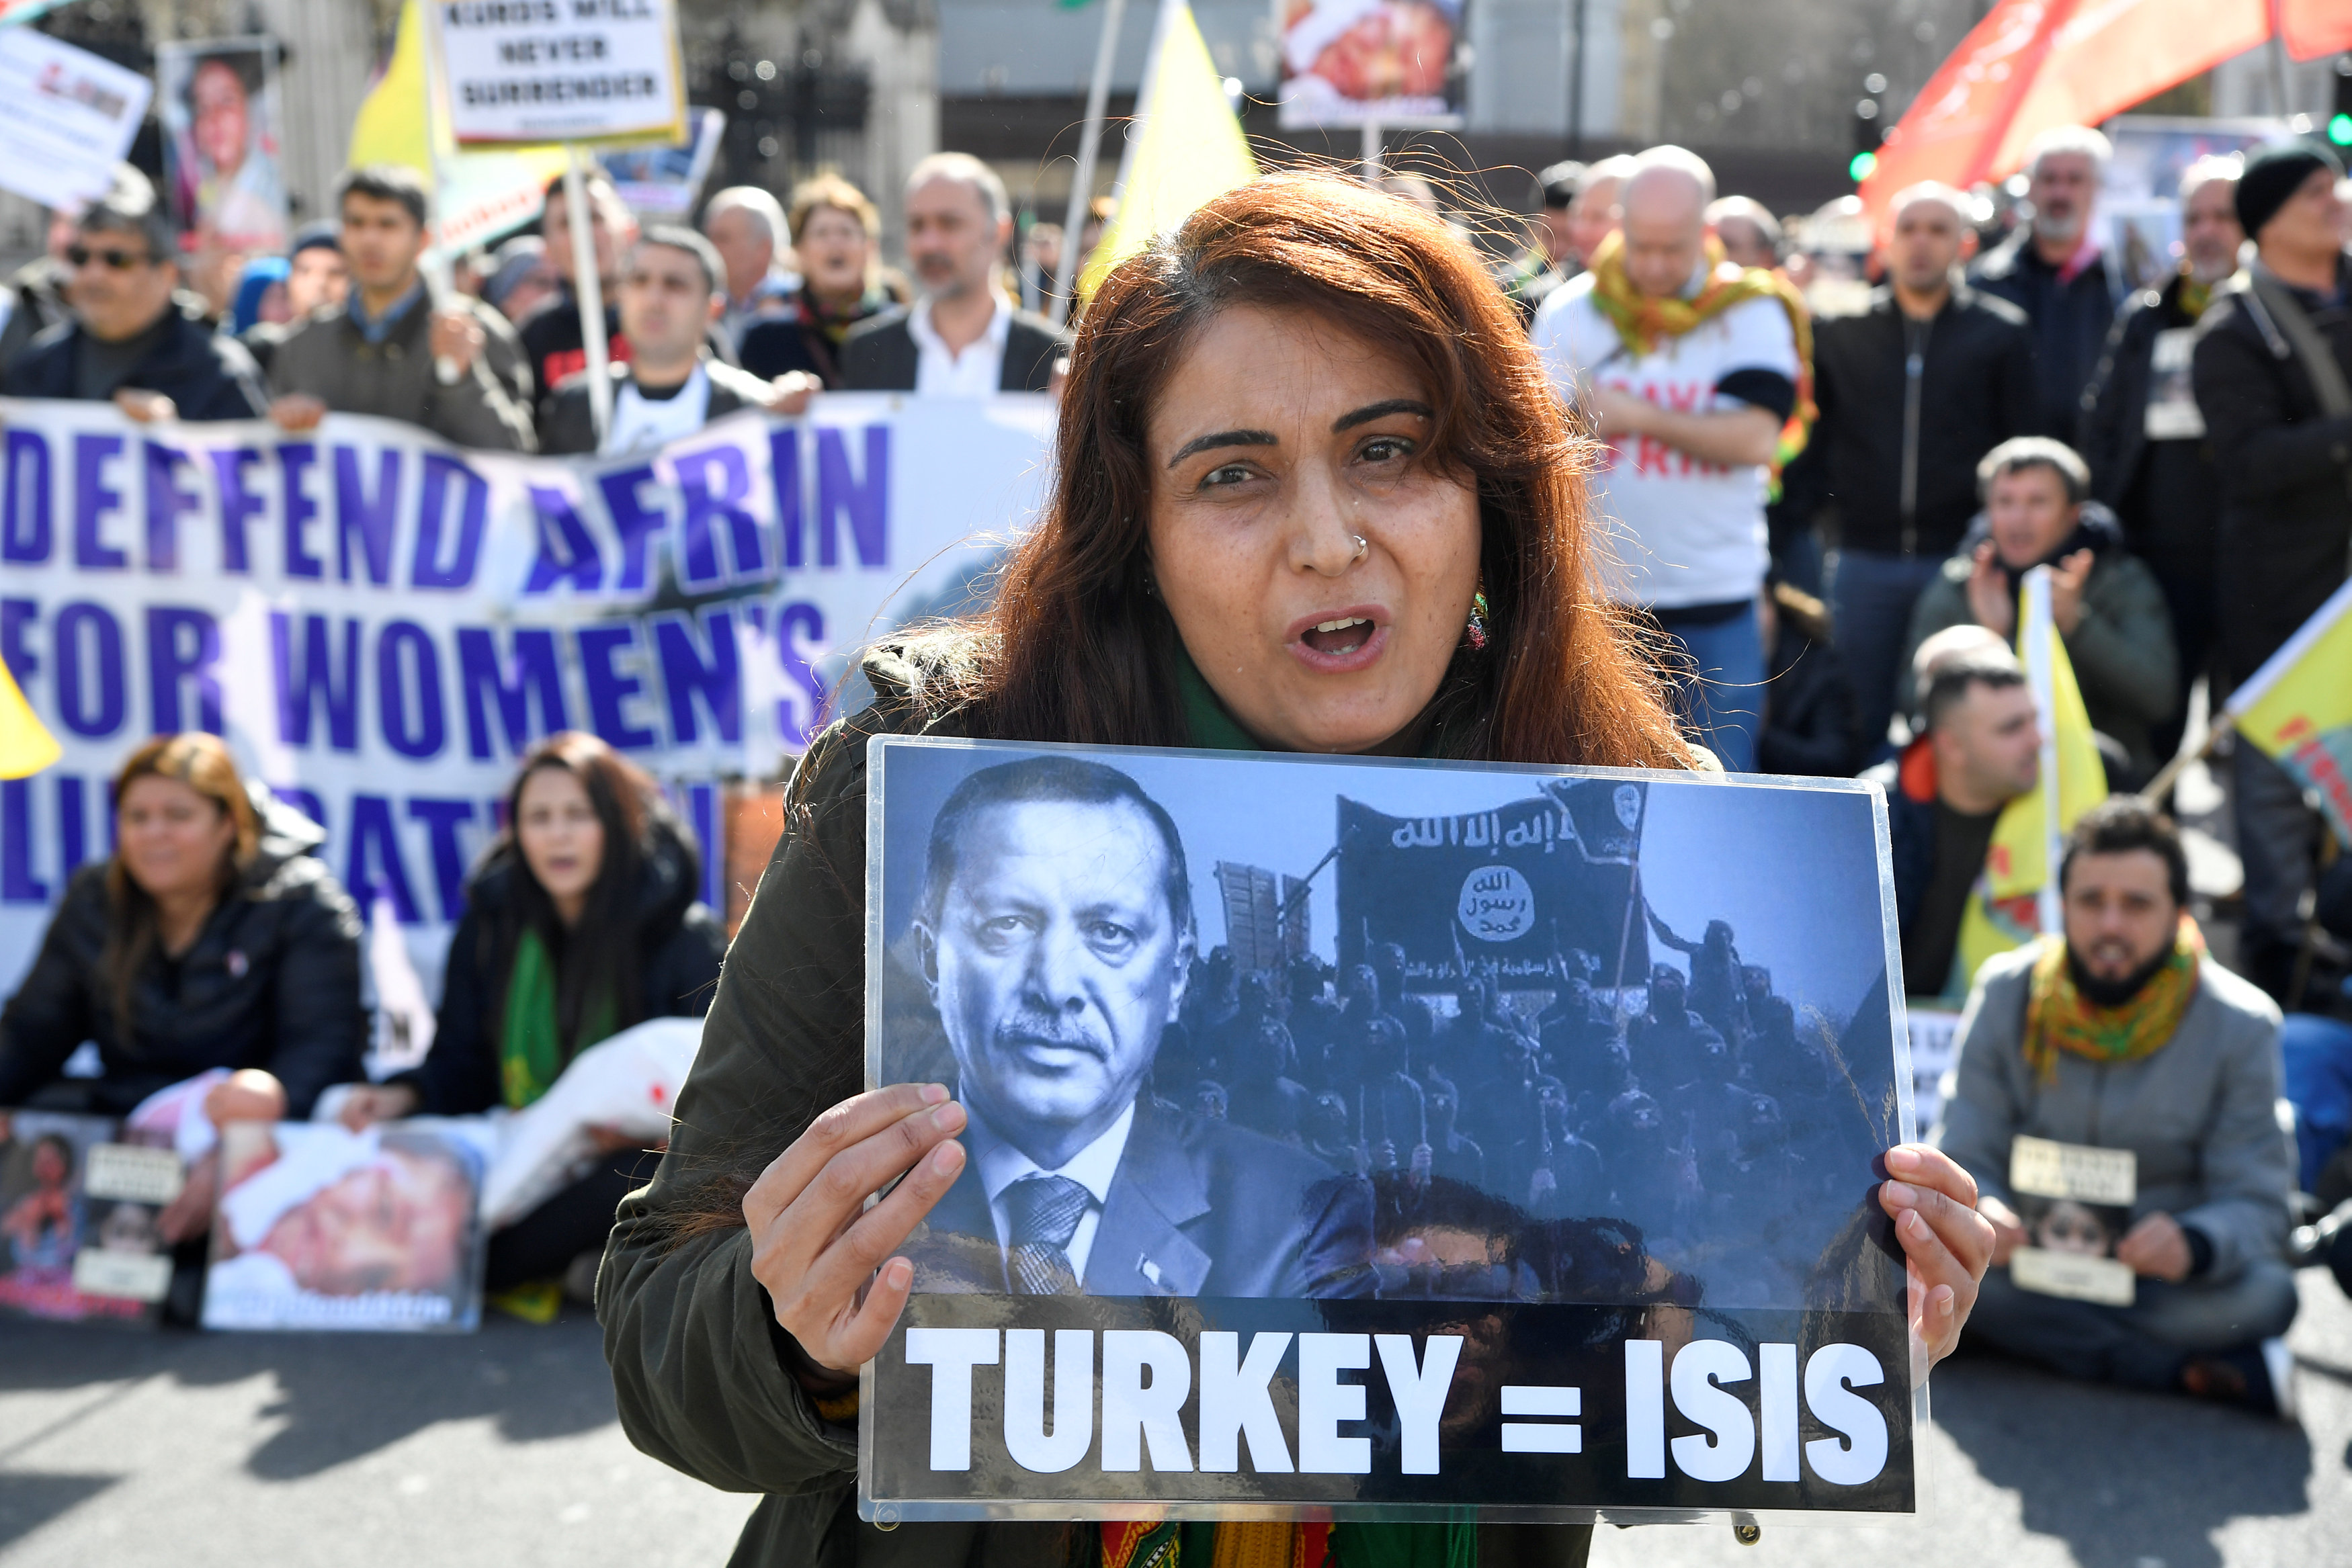 Demonstrators protest against the attack on Afrin, during a march in Westminster, London, Britain March 14, 2018.